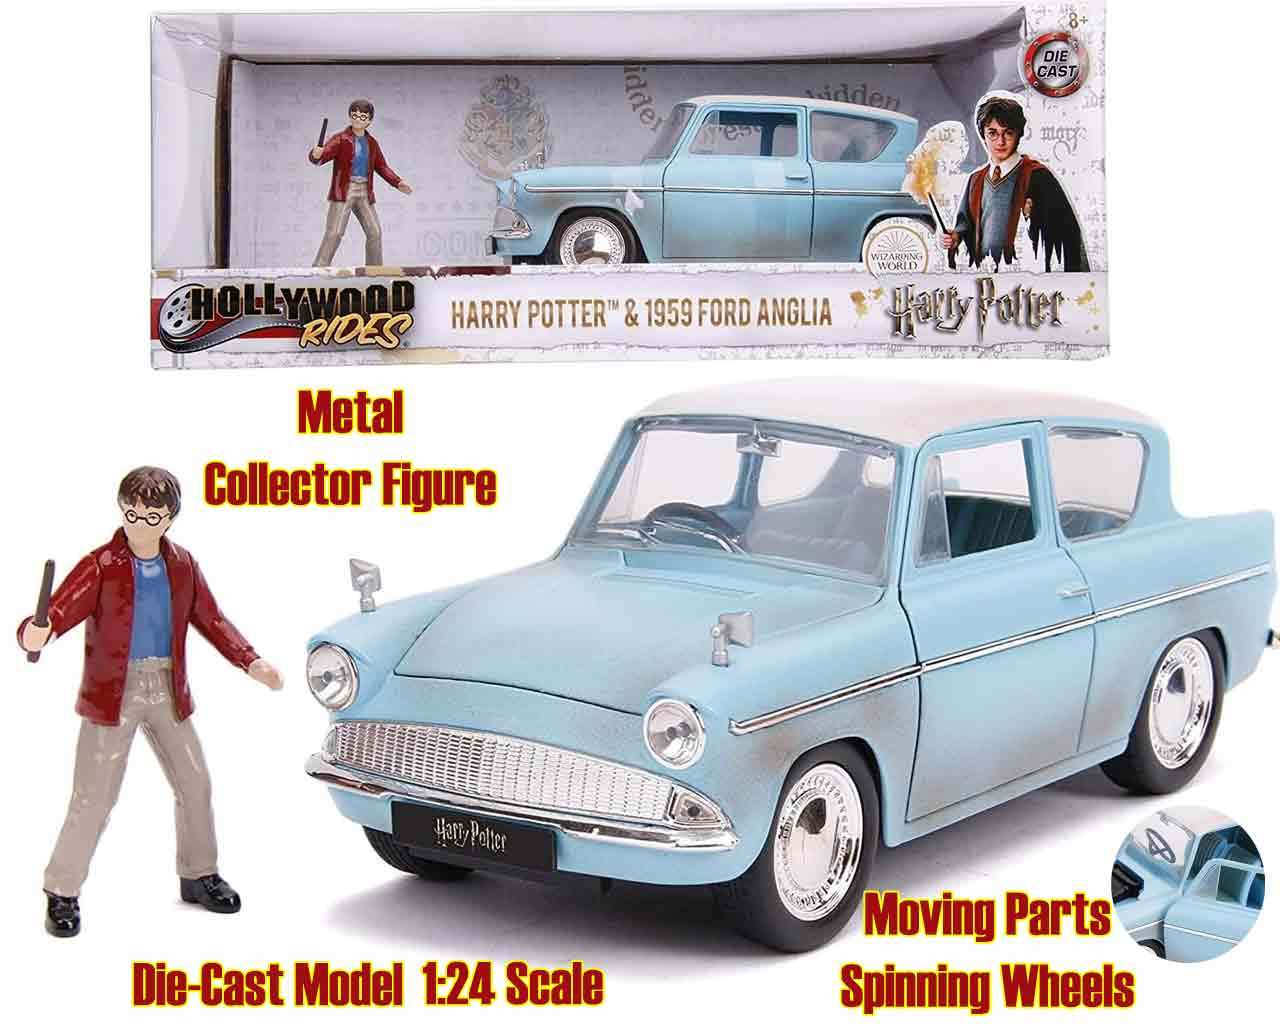 98778-HARRY POTTER FORD ANGLIA 1:24